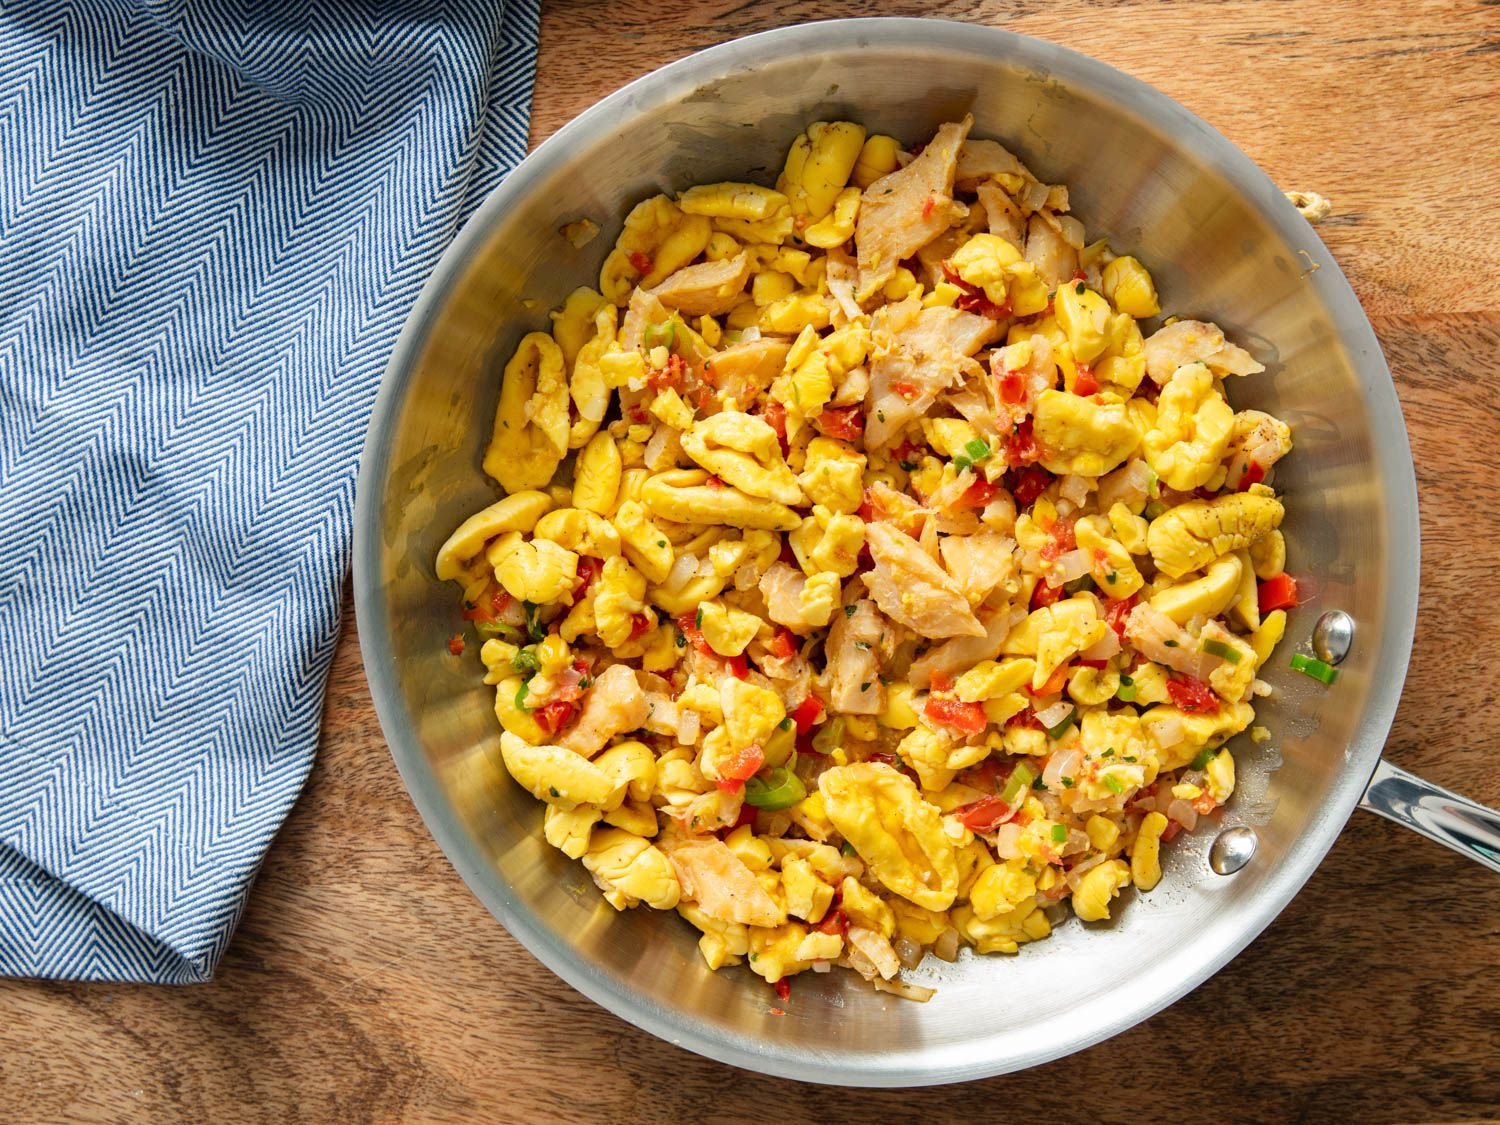 Breakfast of Champions: Ackee and Saltfish, Jamaica's National Dish